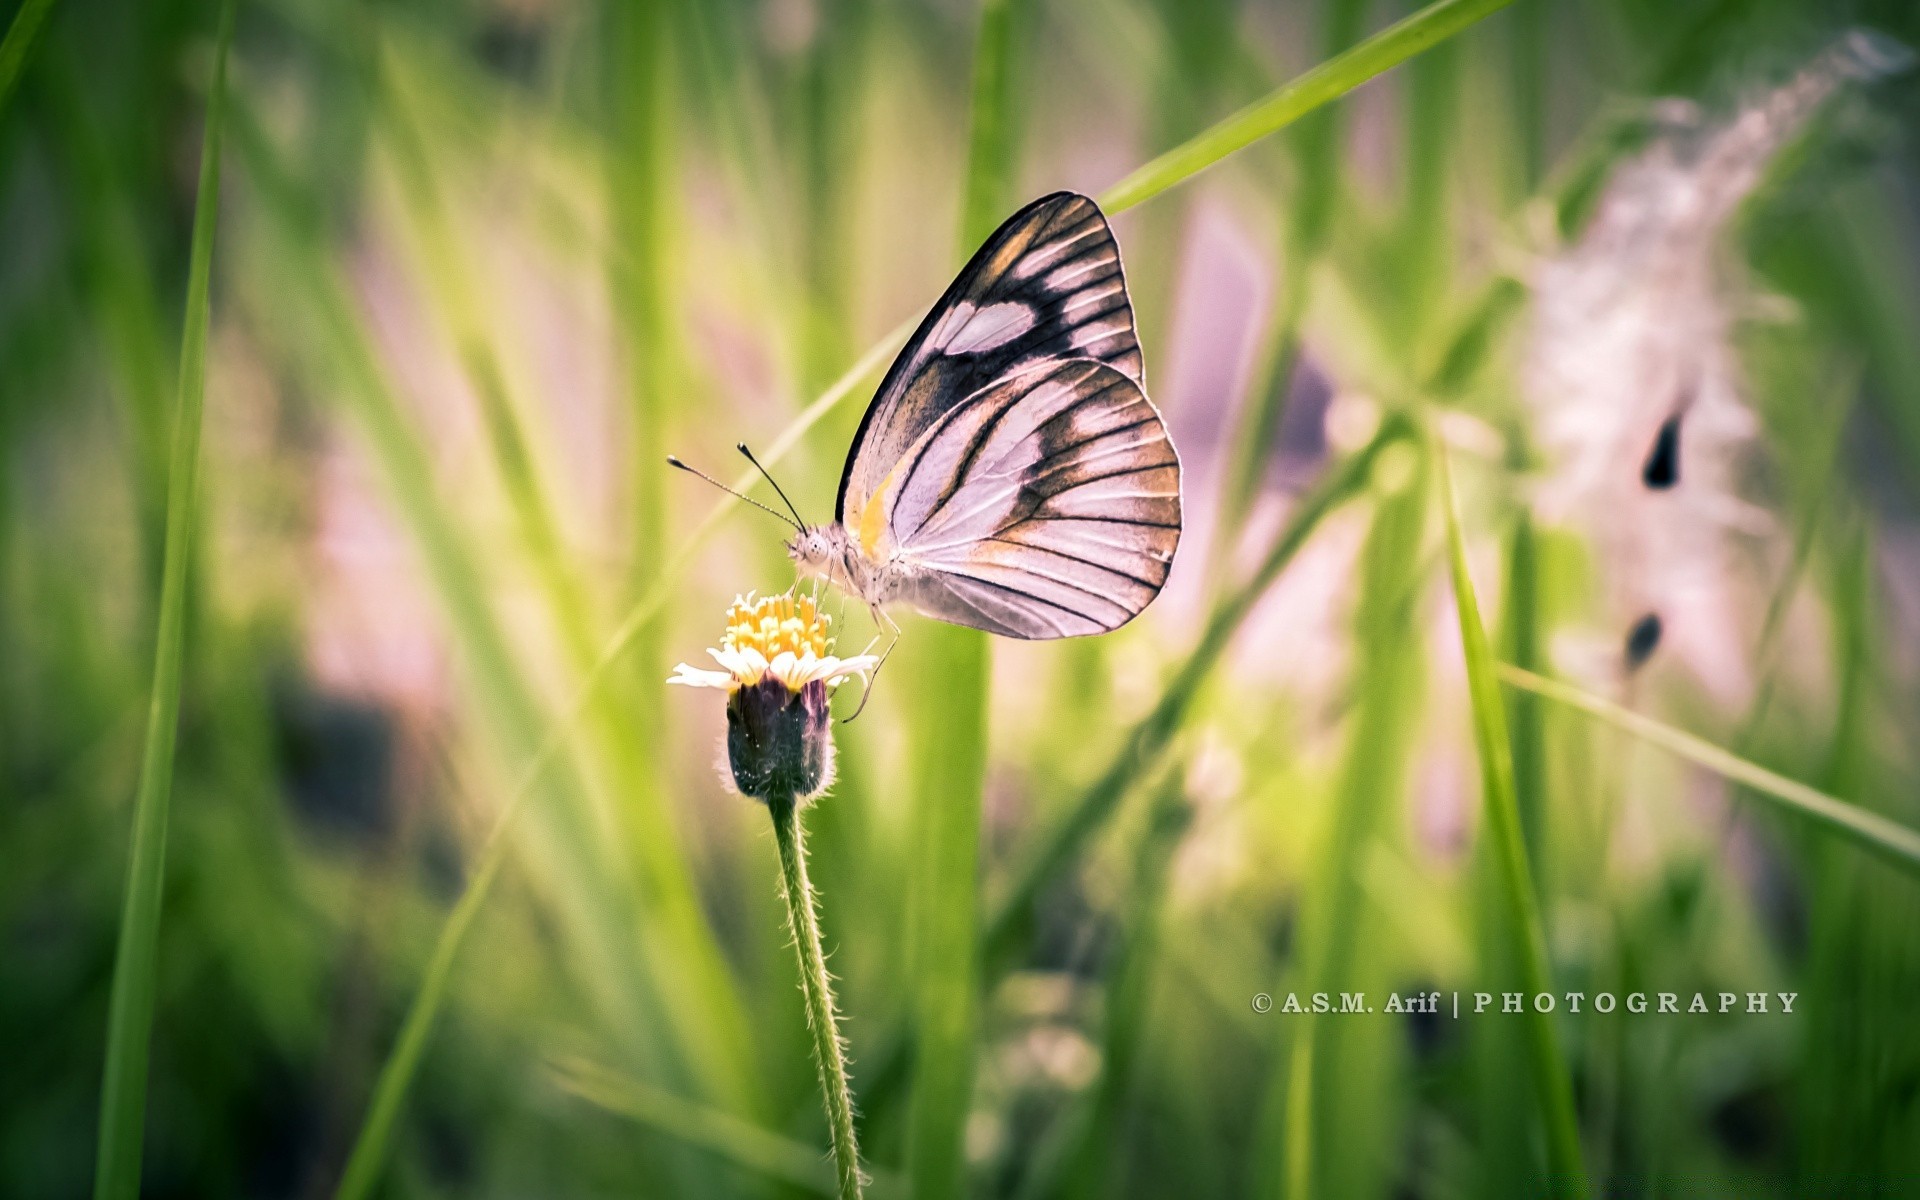 butterfly nature insect summer grass outdoors bright wildlife hayfield fair weather wild garden flora little flower wing leaf delicate animal